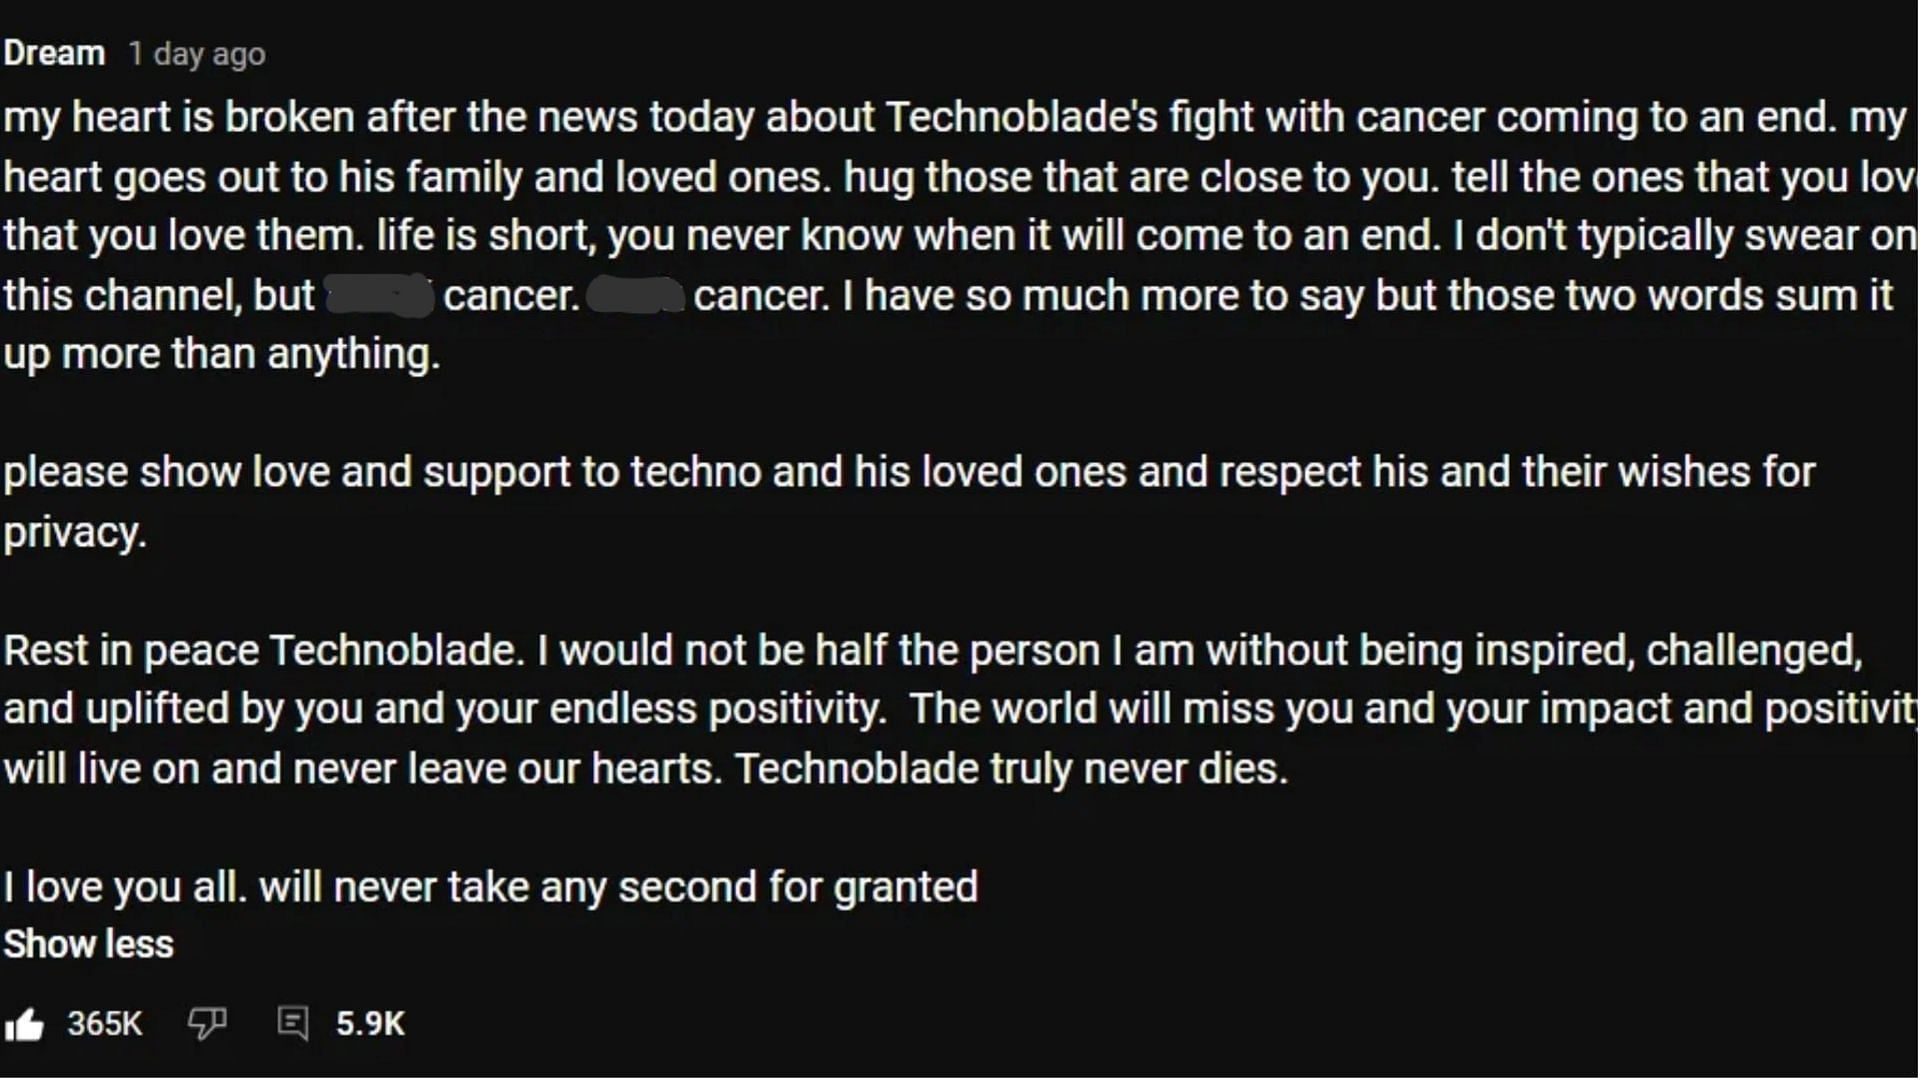 Dream posts tribute to Technoblade after Minecraft r's